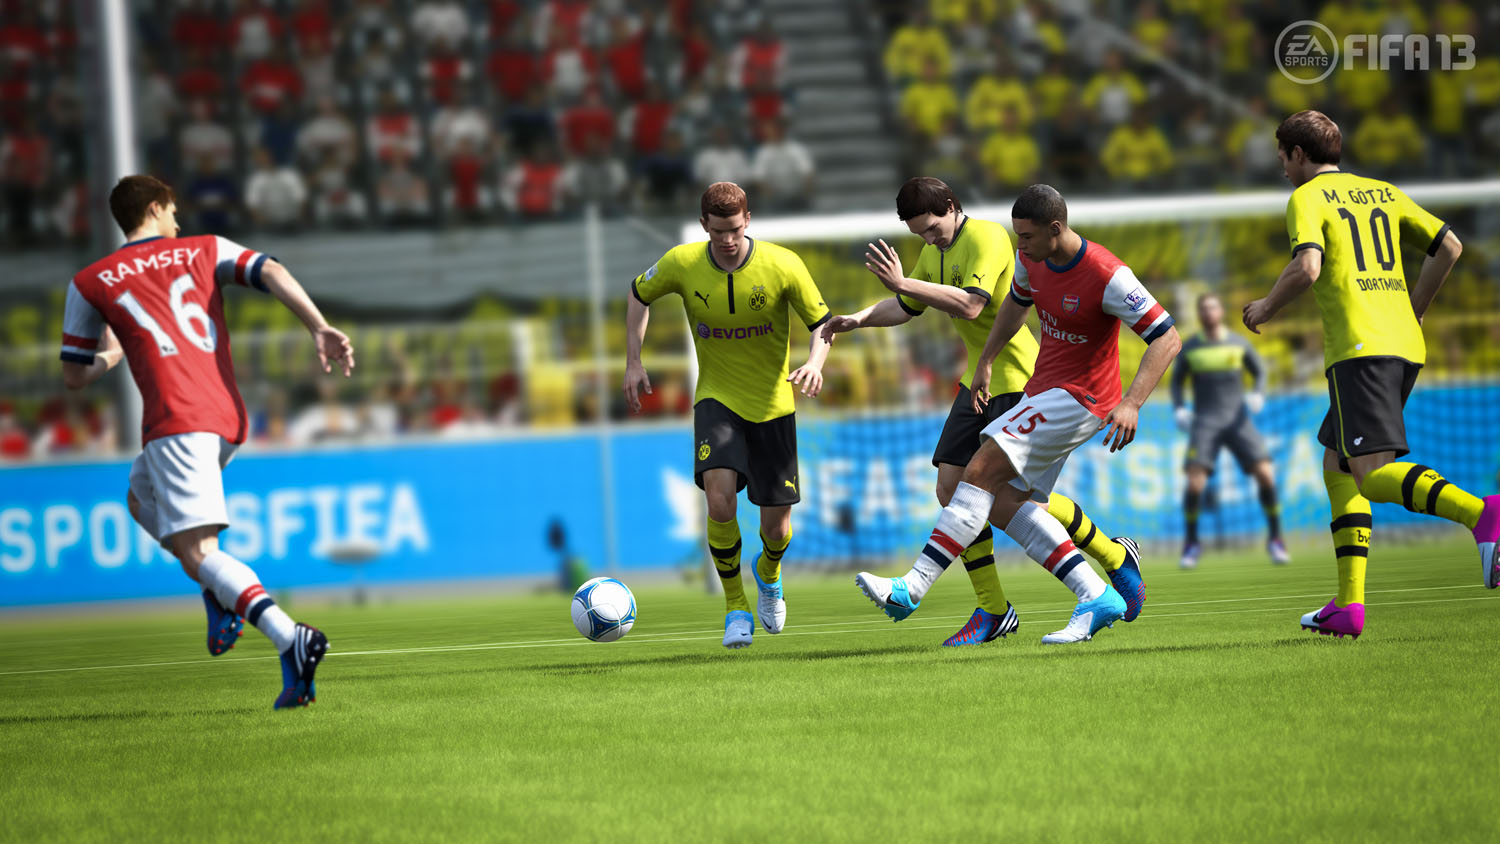 fifa 13 3ds liga patch download